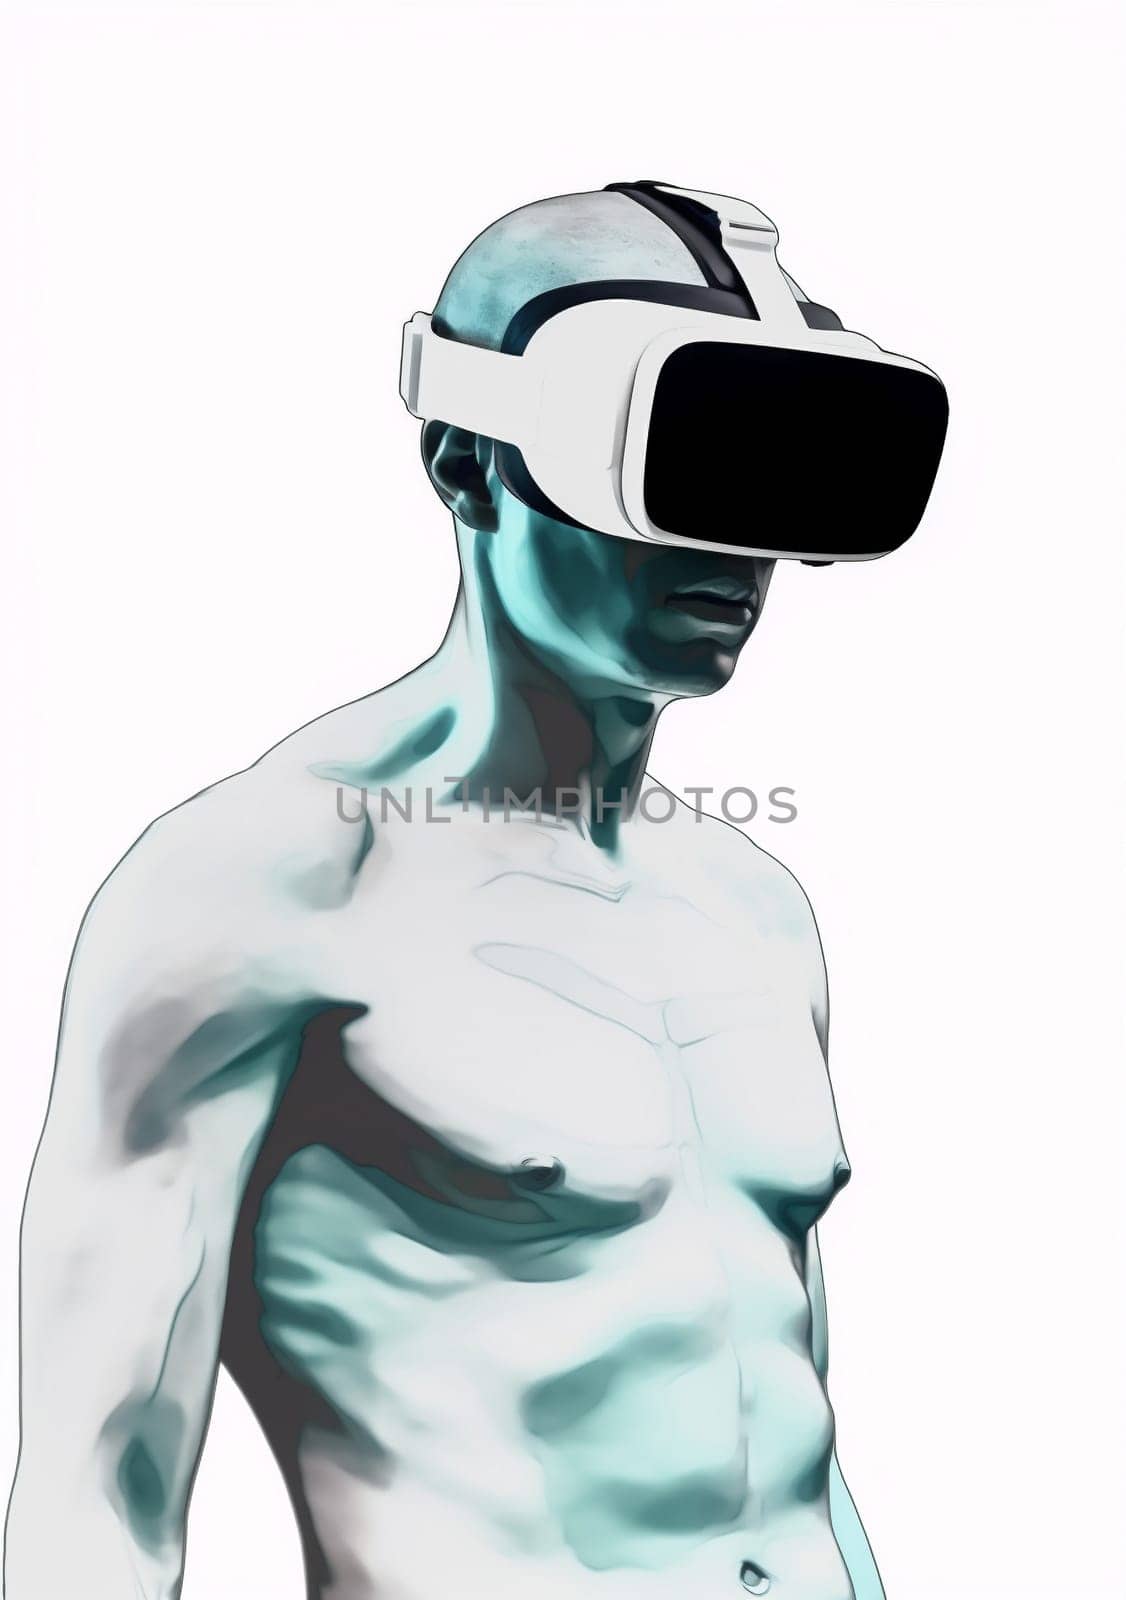 game man gadget abstract technology tech copy headset minimalism helmet experience neon vr goggles gamer glasses space person digital cyber futuristic reality. Generative AI.